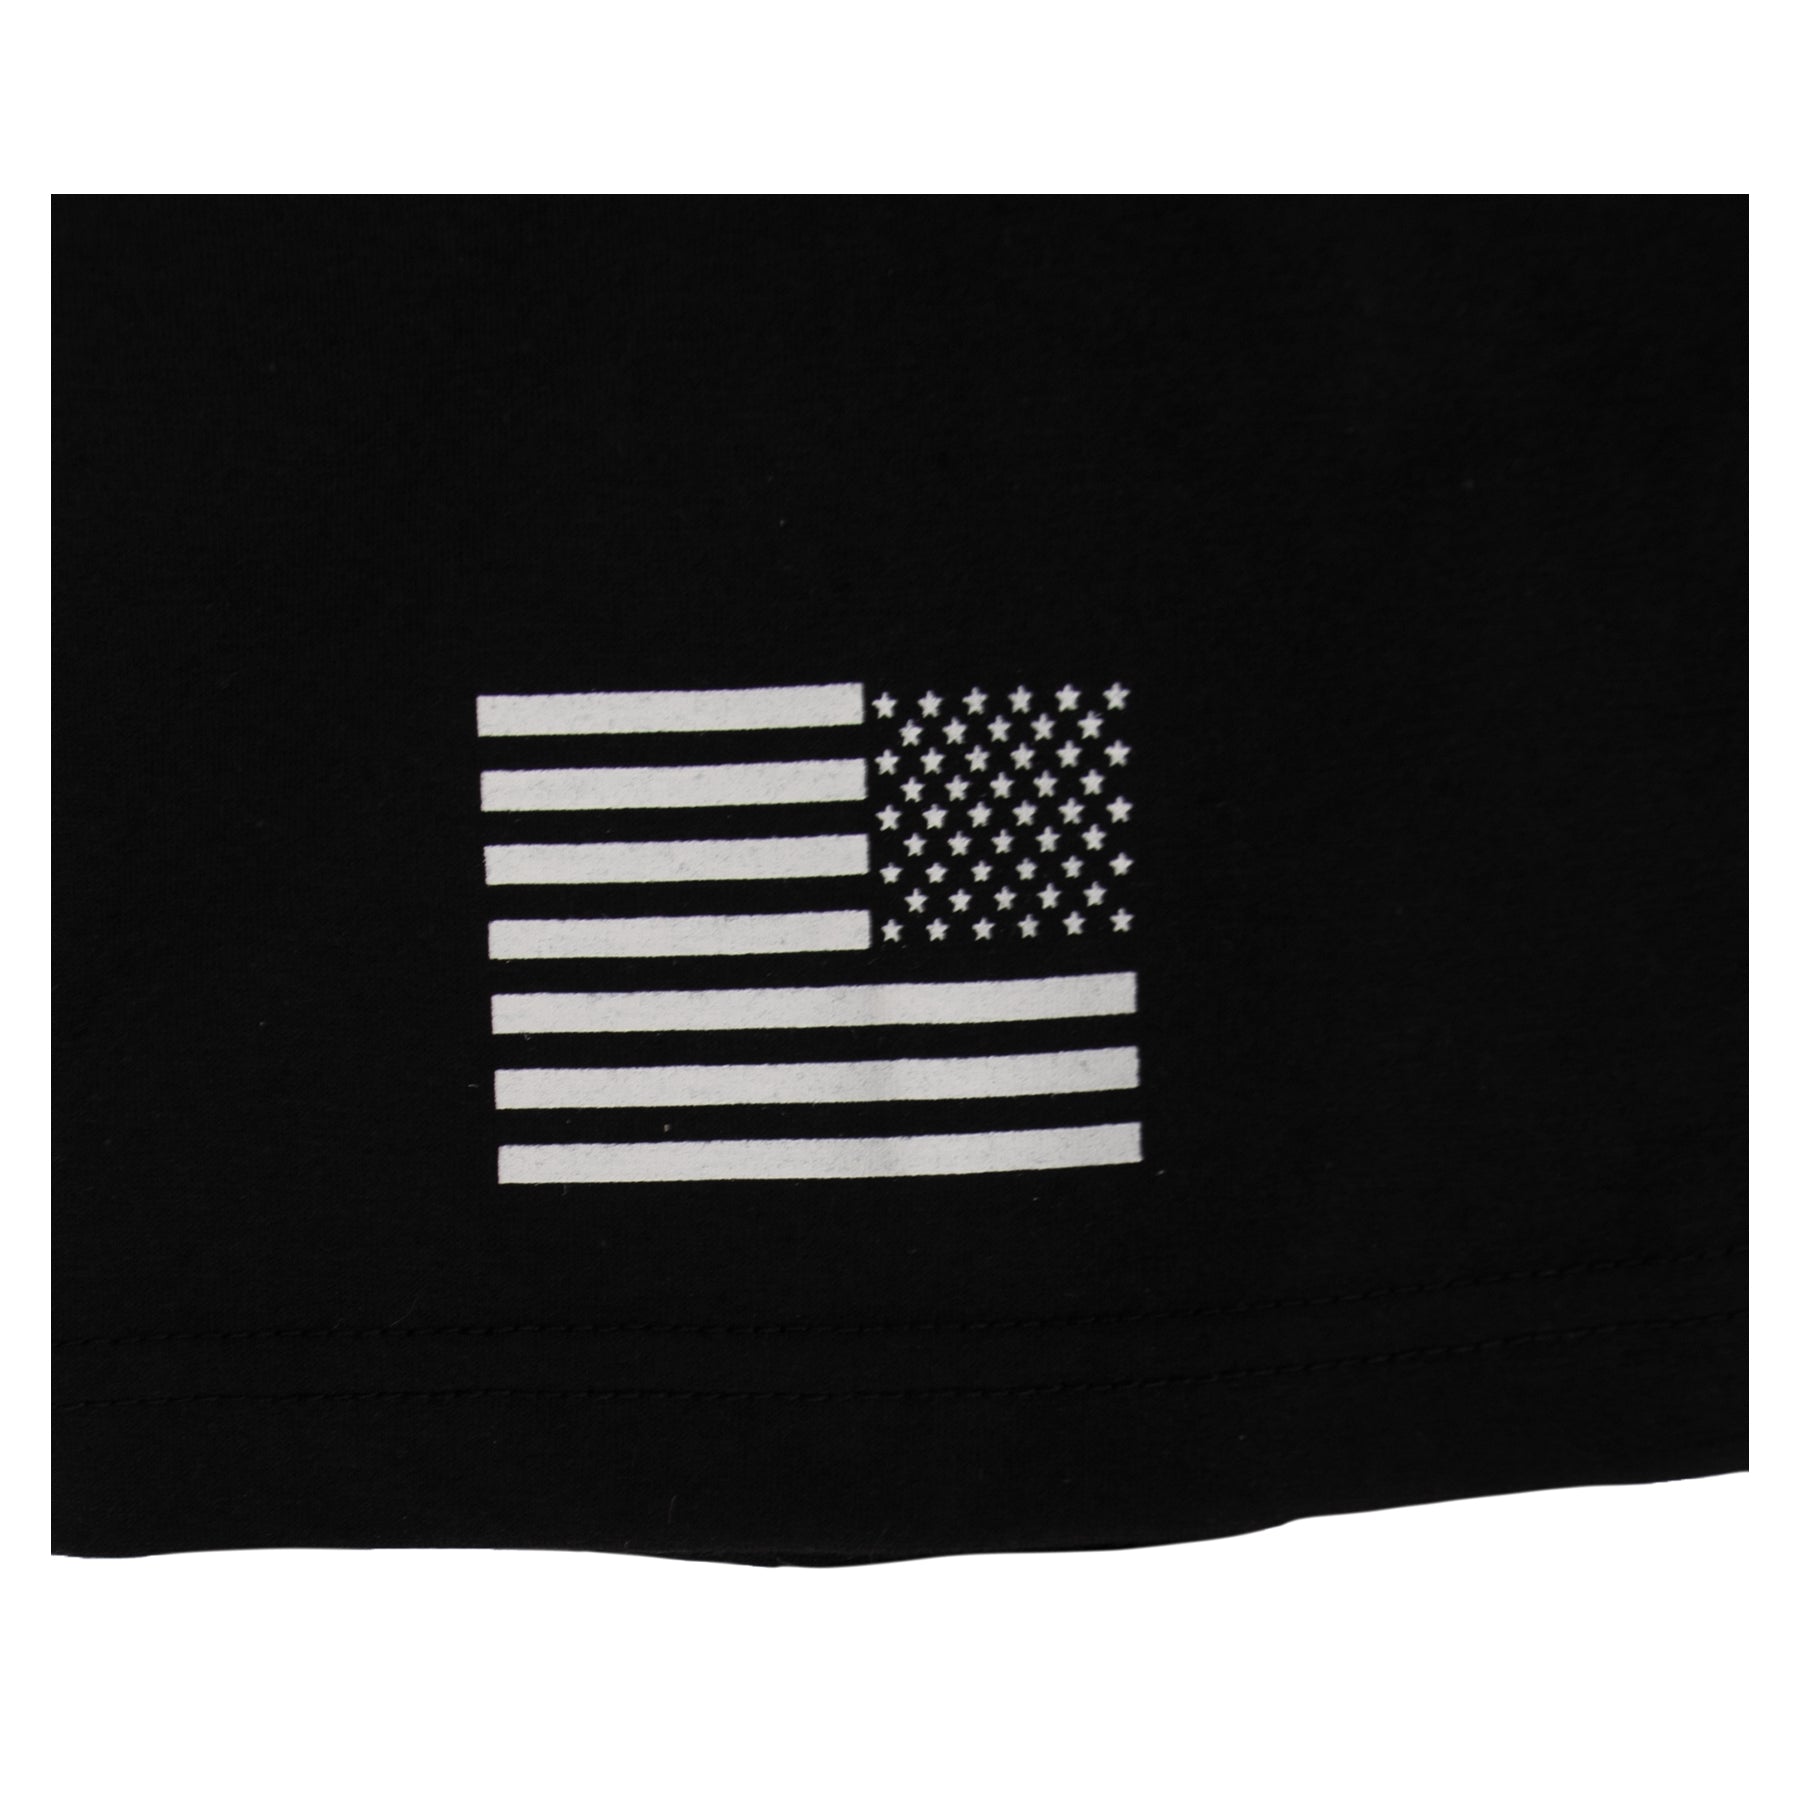 Rothco 2-Sided Security T-Shirt with US Flag On Sleeve